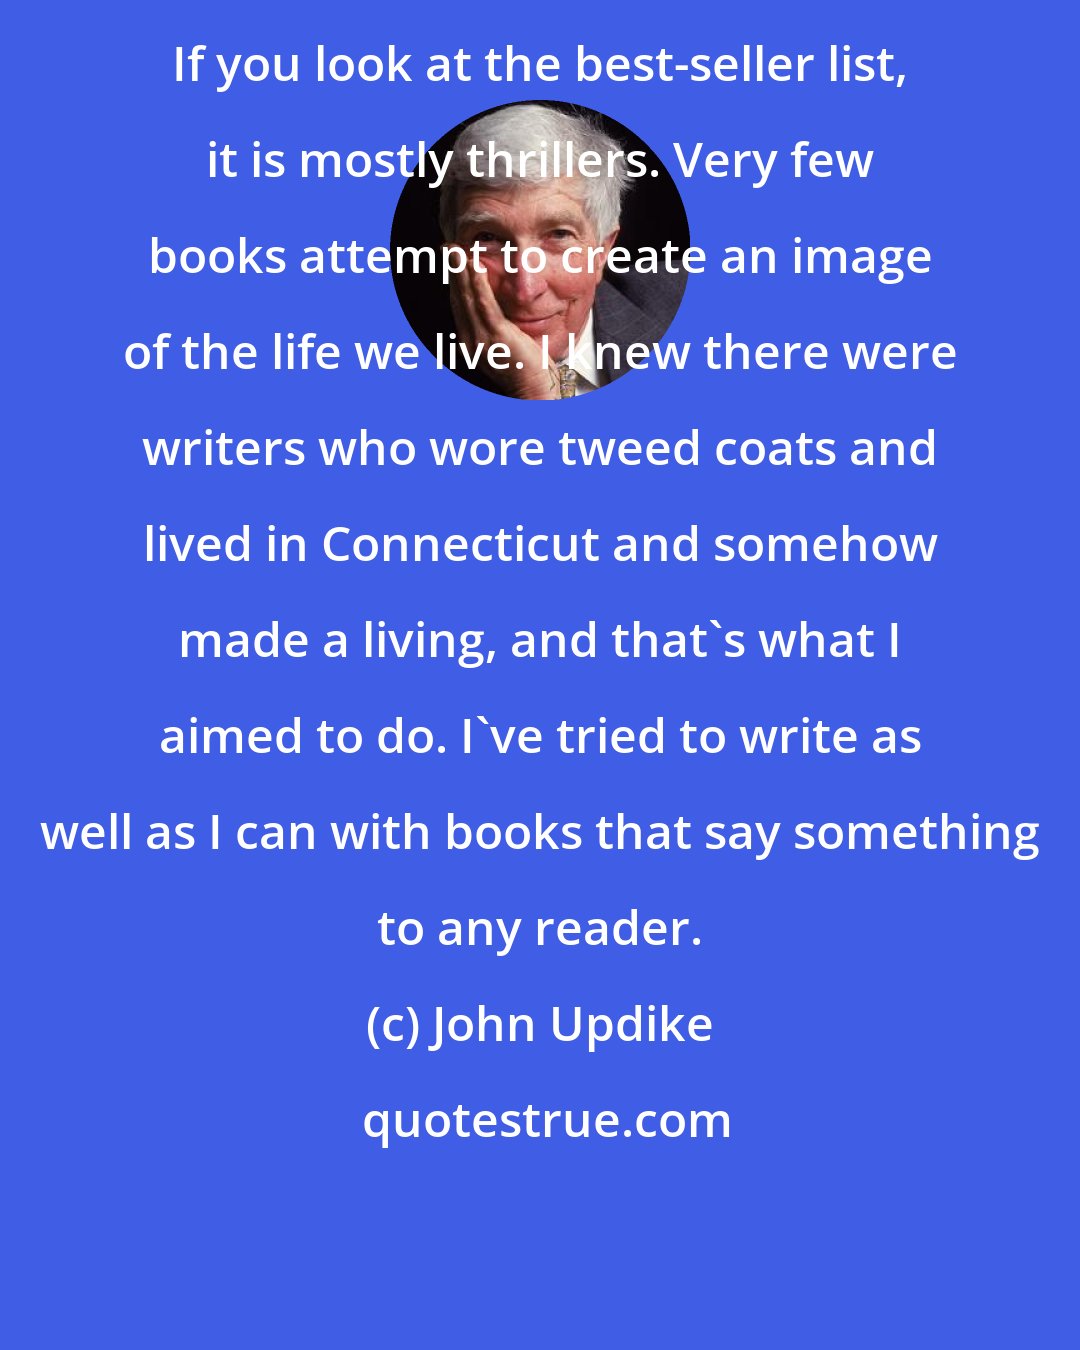 John Updike: If you look at the best-seller list, it is mostly thrillers. Very few books attempt to create an image of the life we live. I knew there were writers who wore tweed coats and lived in Connecticut and somehow made a living, and that's what I aimed to do. I've tried to write as well as I can with books that say something to any reader.